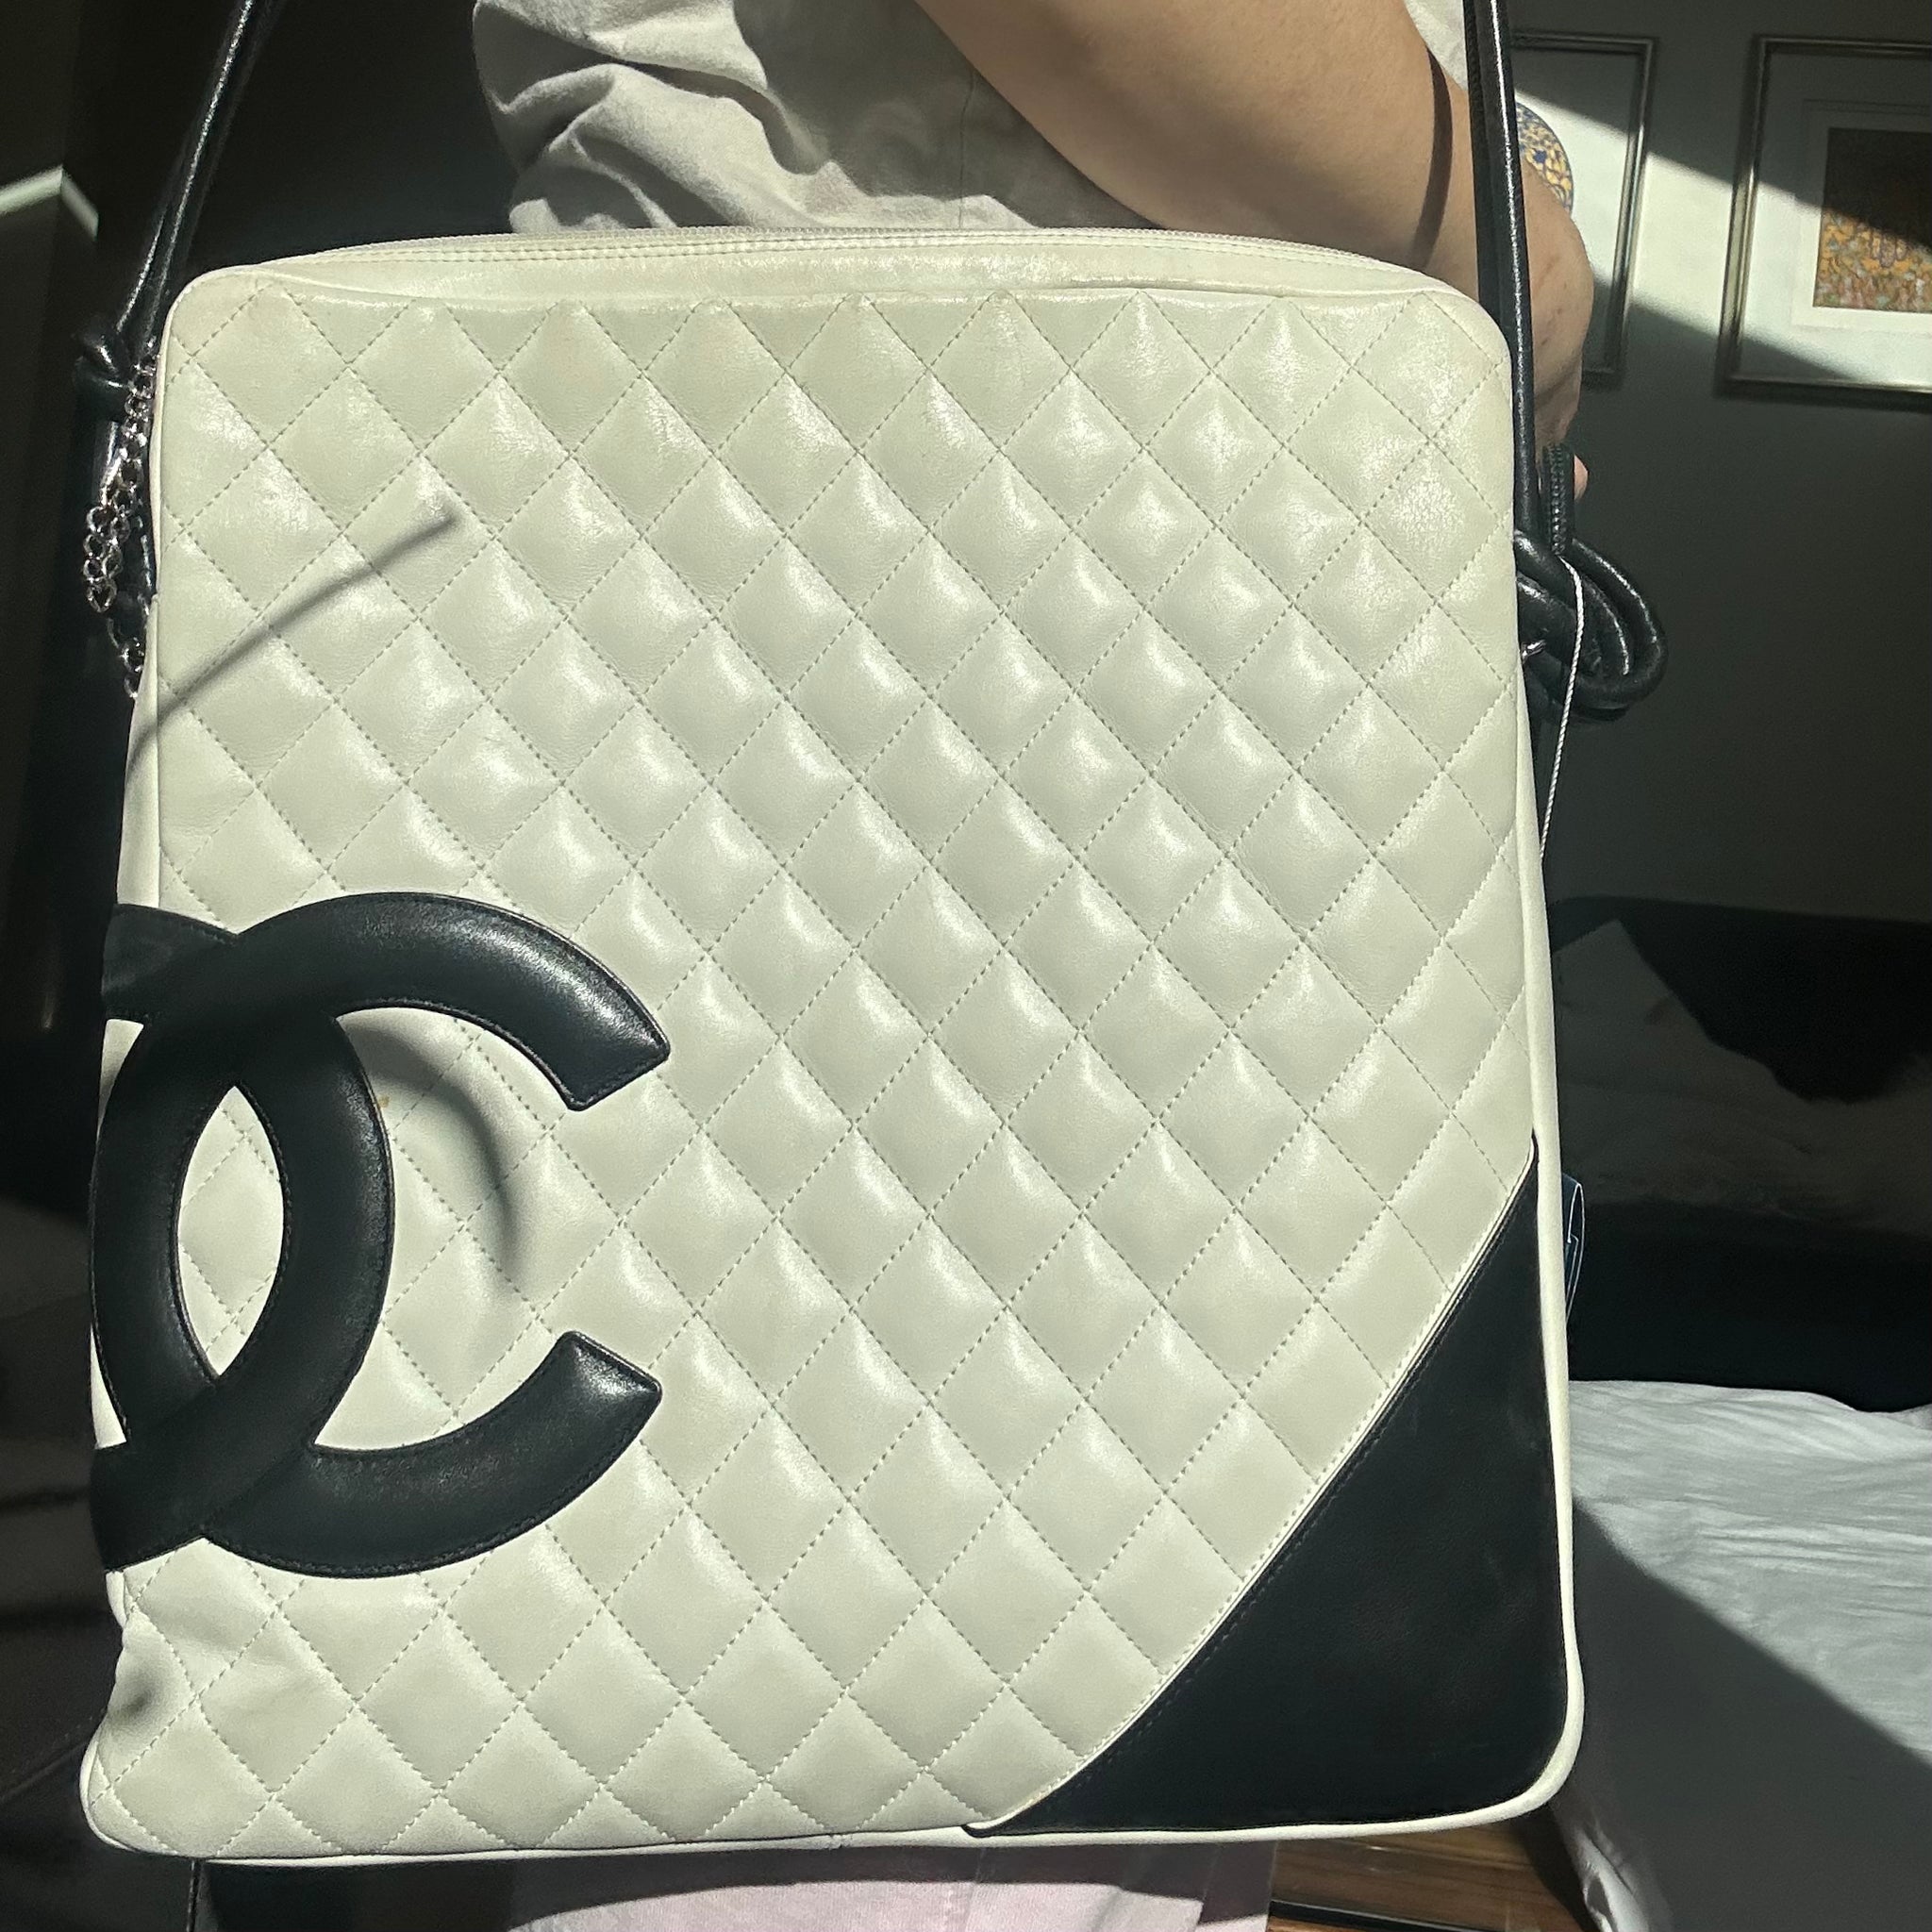 Chanel Cambon Leather Cross Body Bag